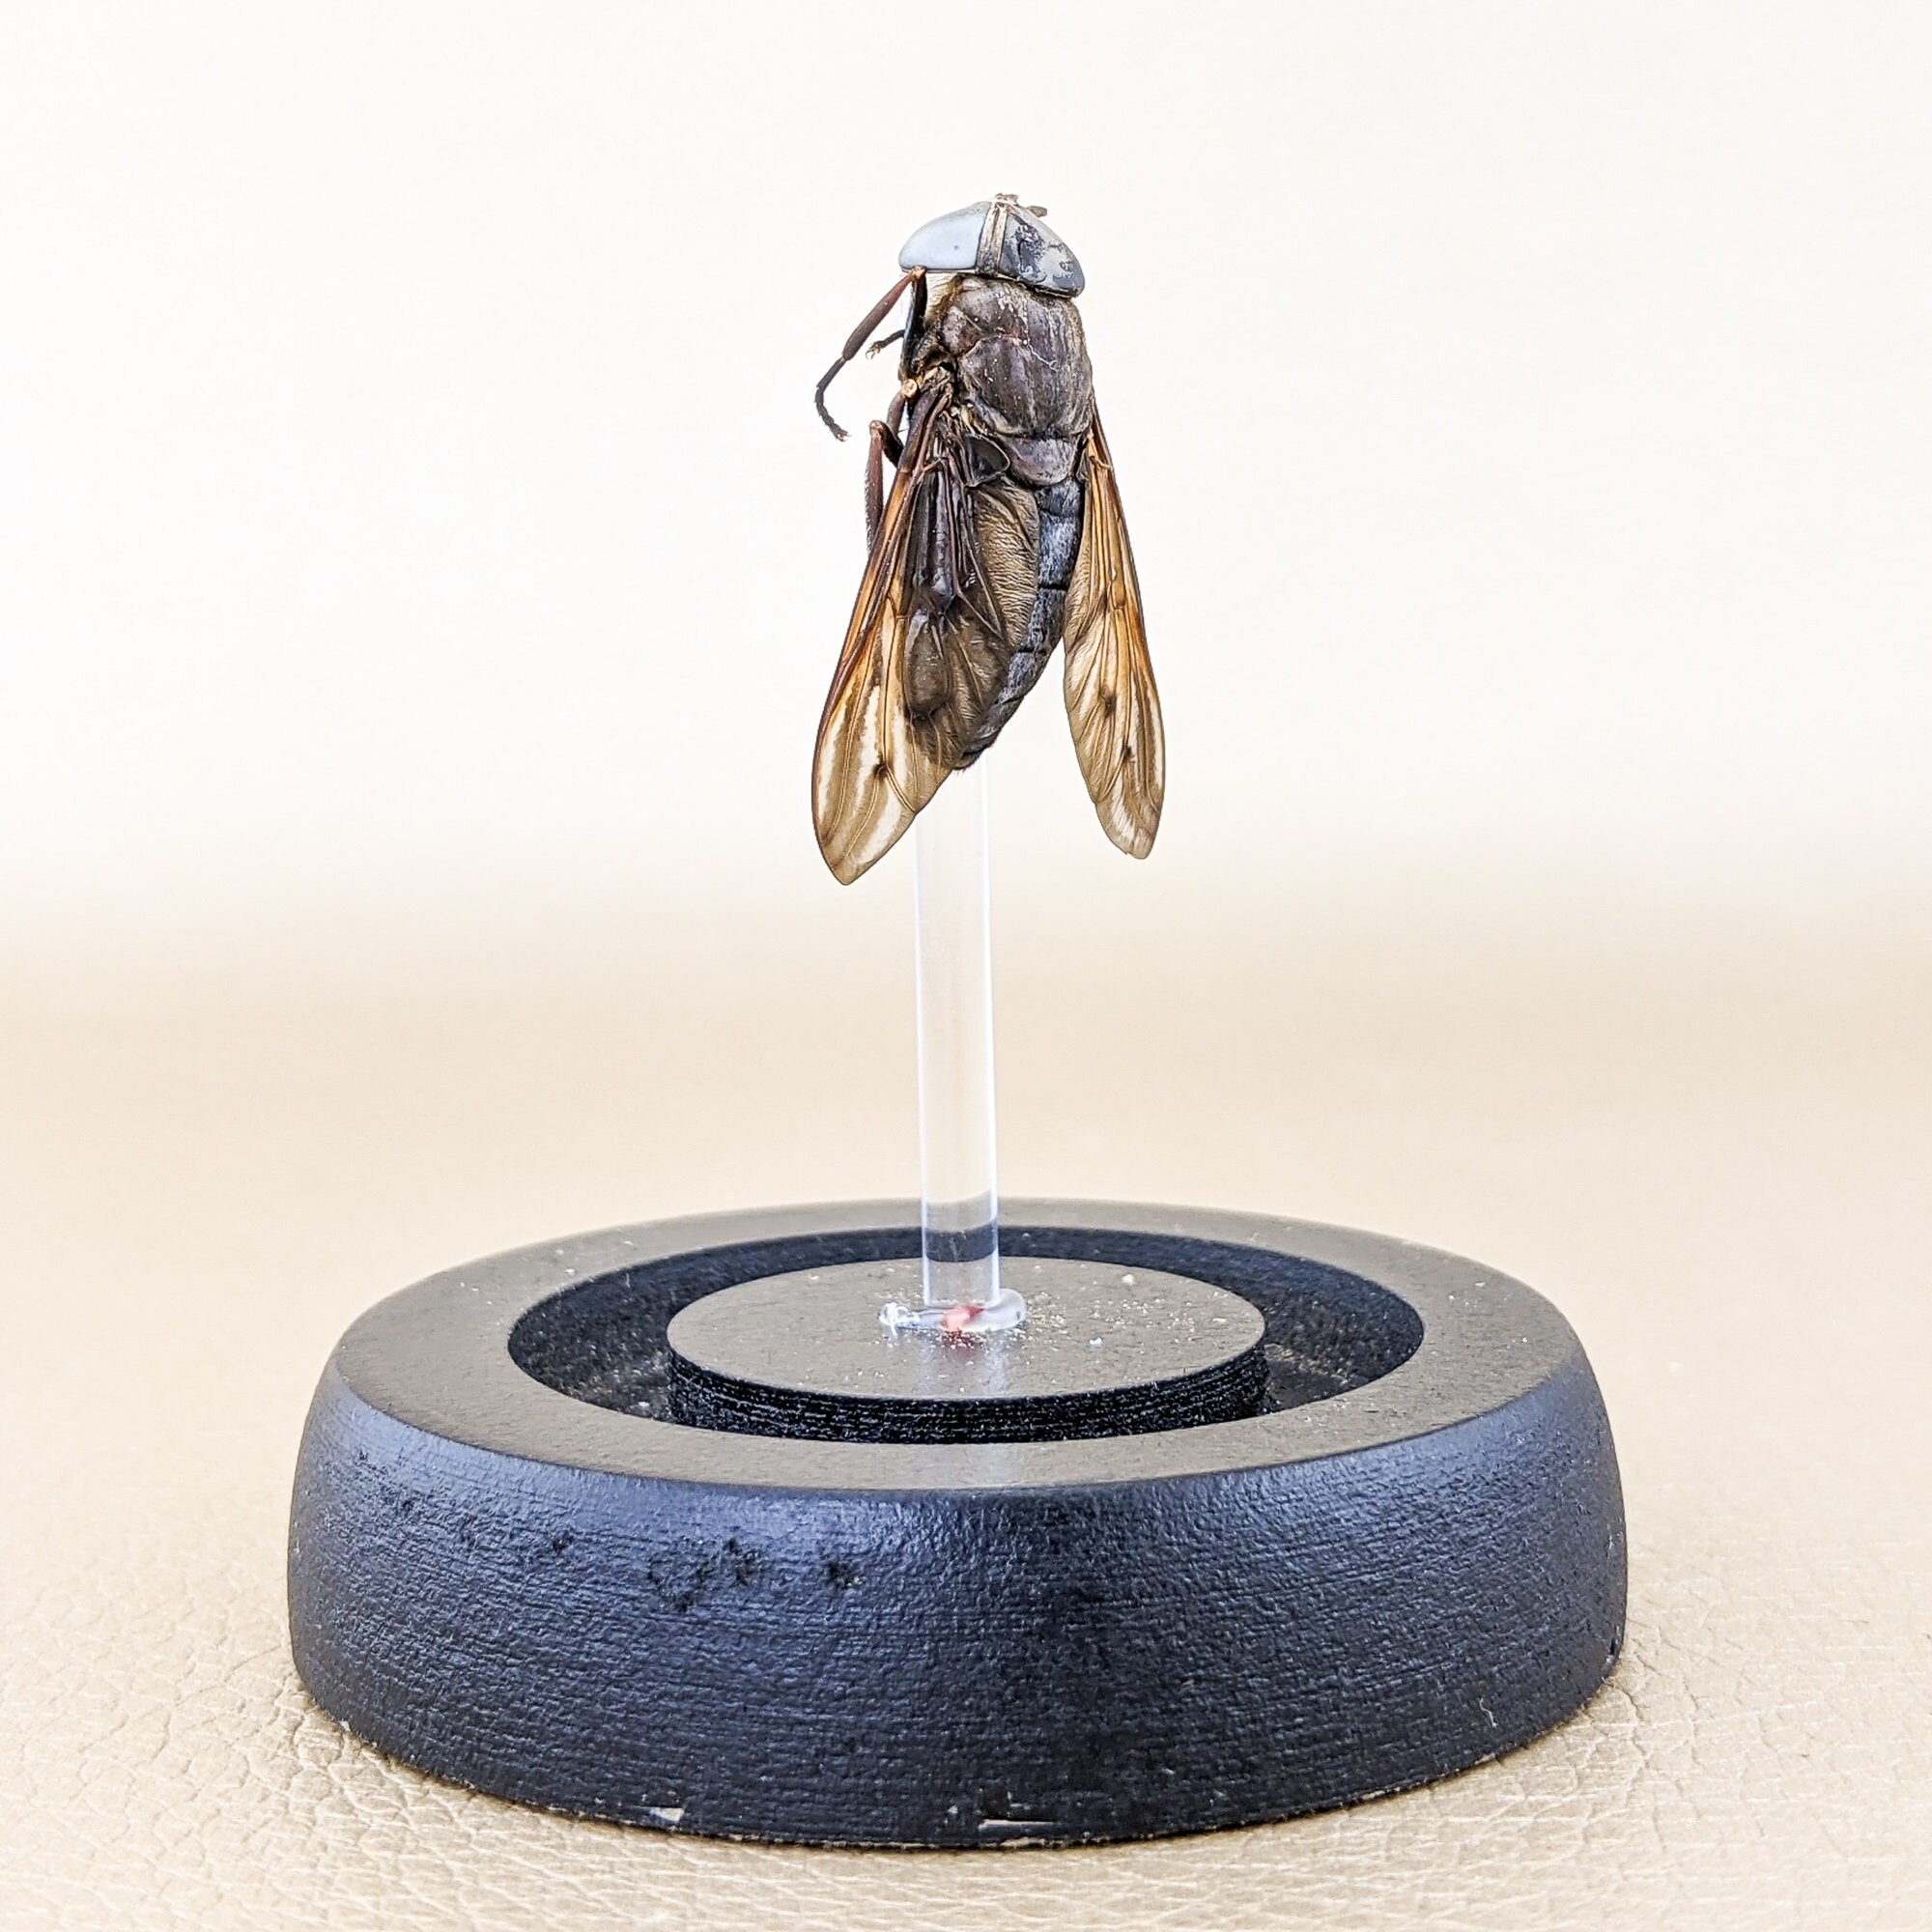 Details about   c "Hello Mc Fly!" Fly specimen in glass dome display Taxidermy insect entomology 